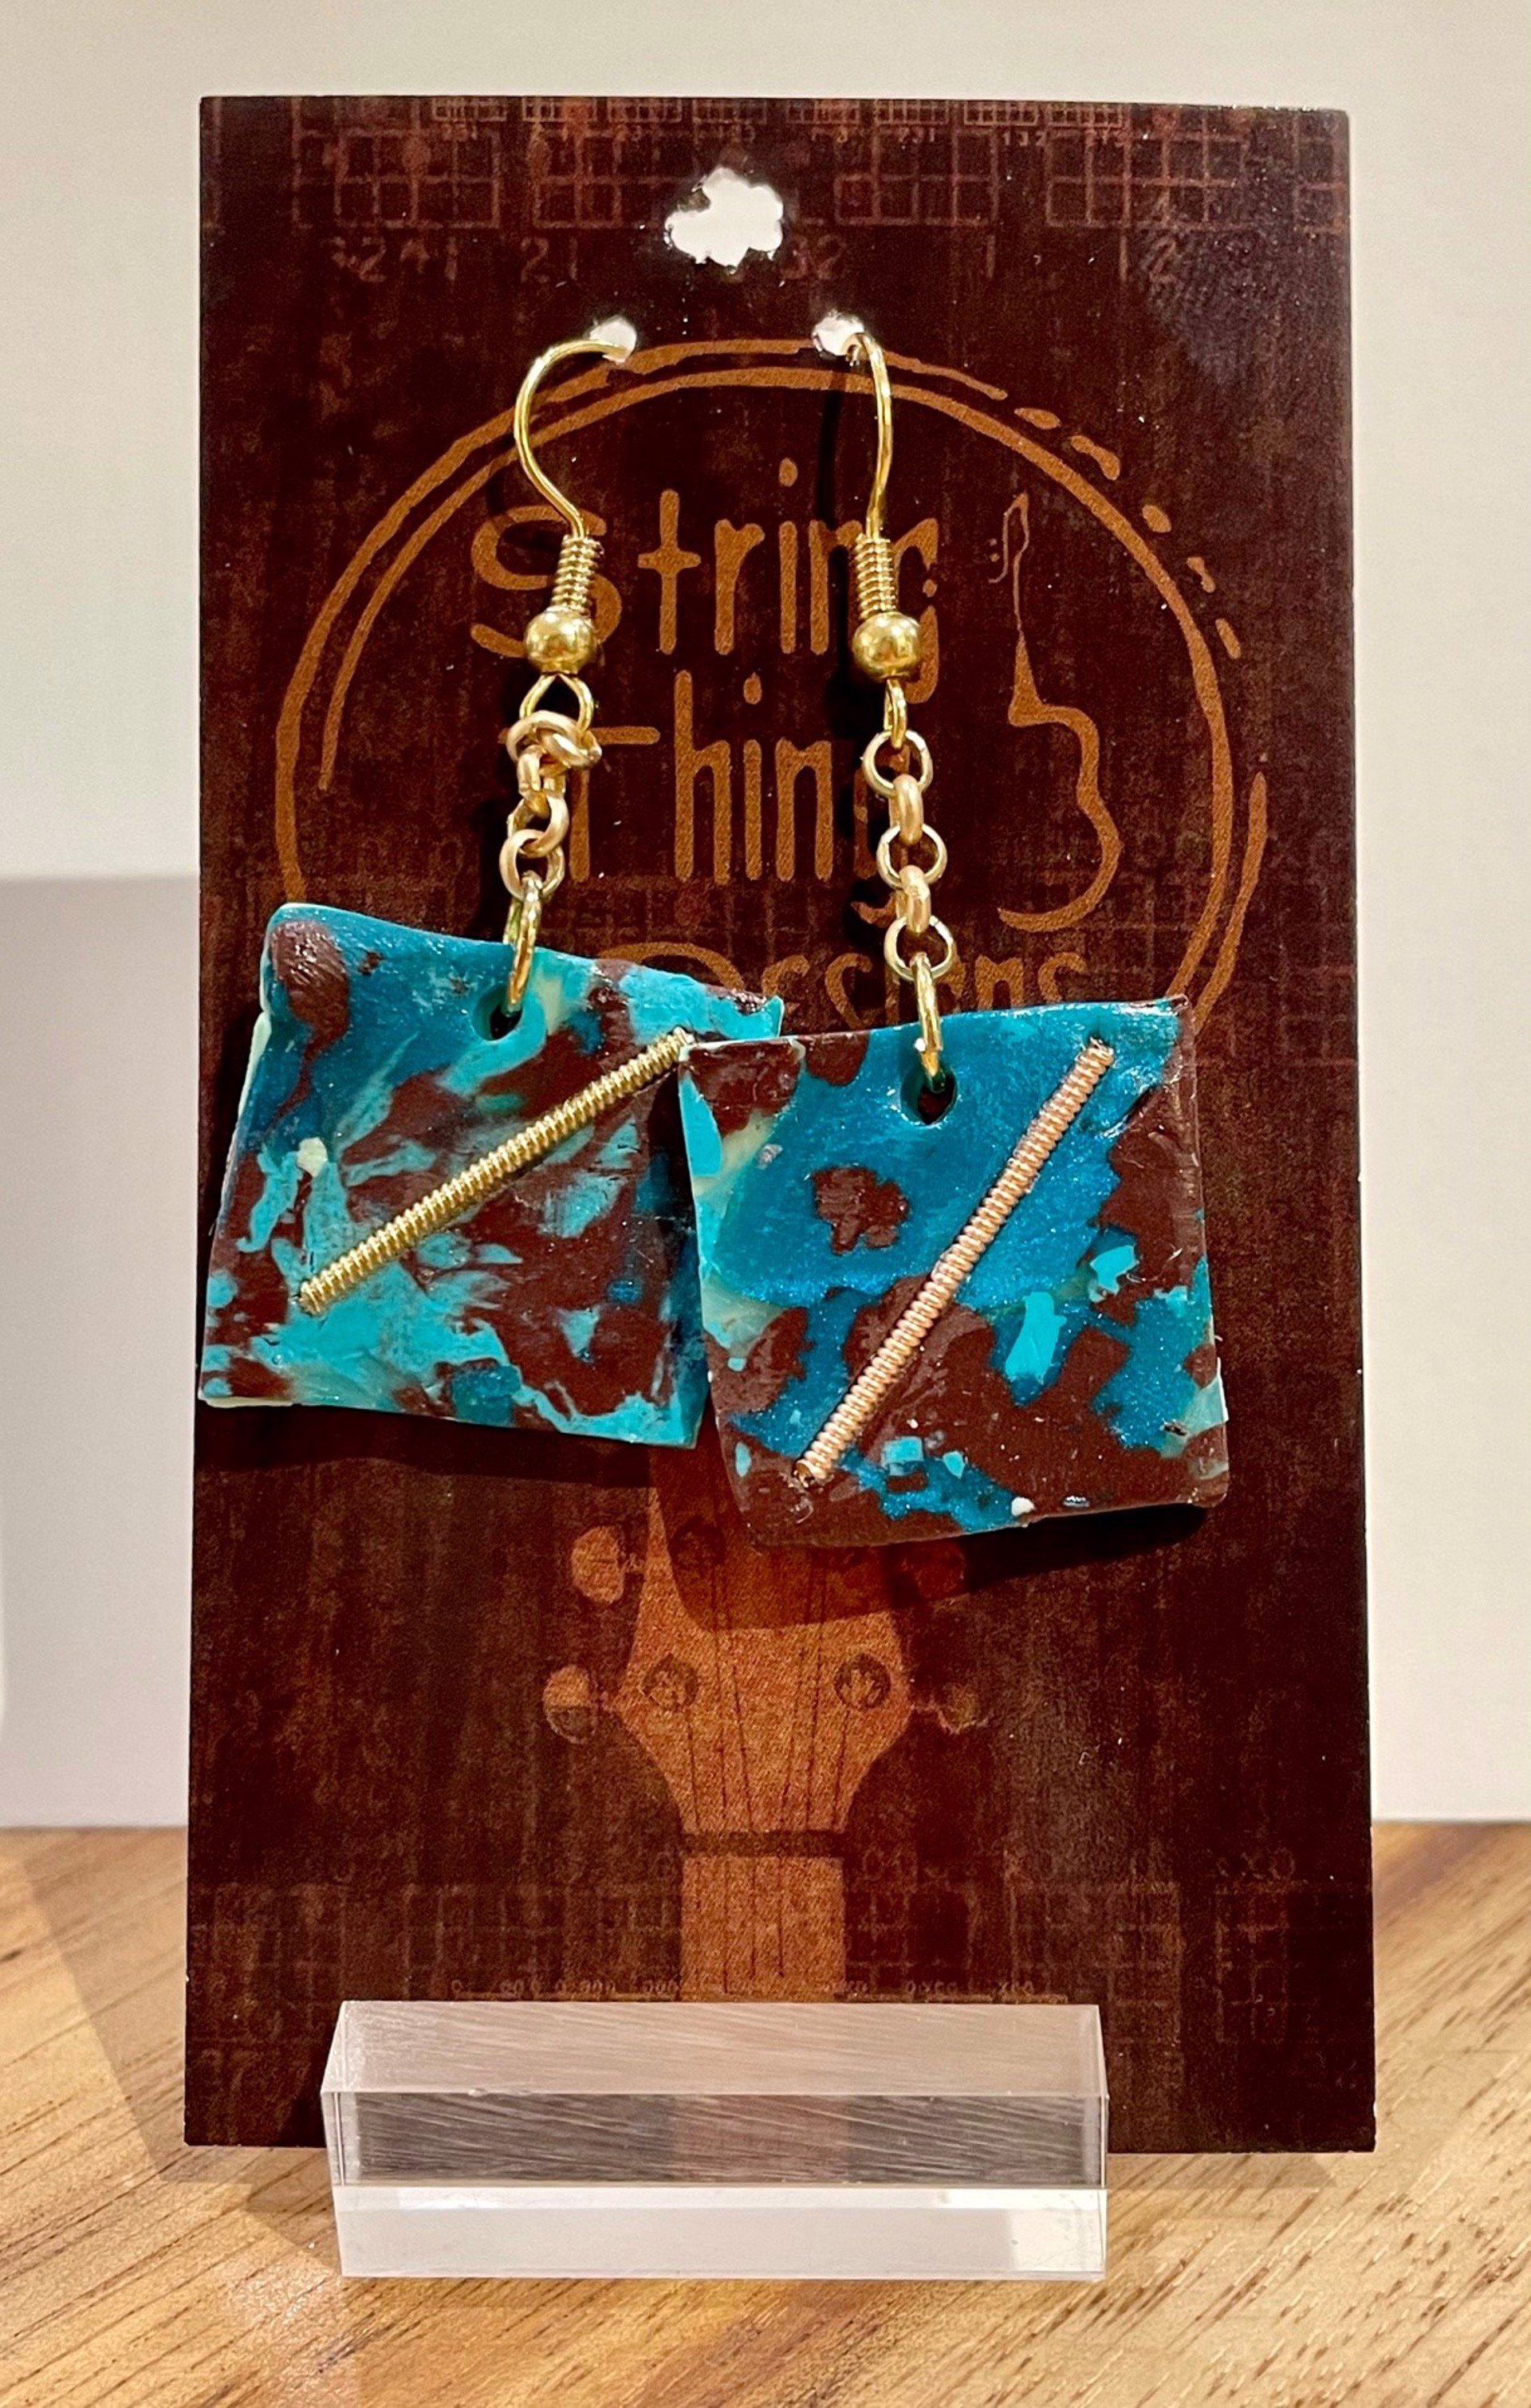 Blue Square Guitar String Earrings by String Thing Designs